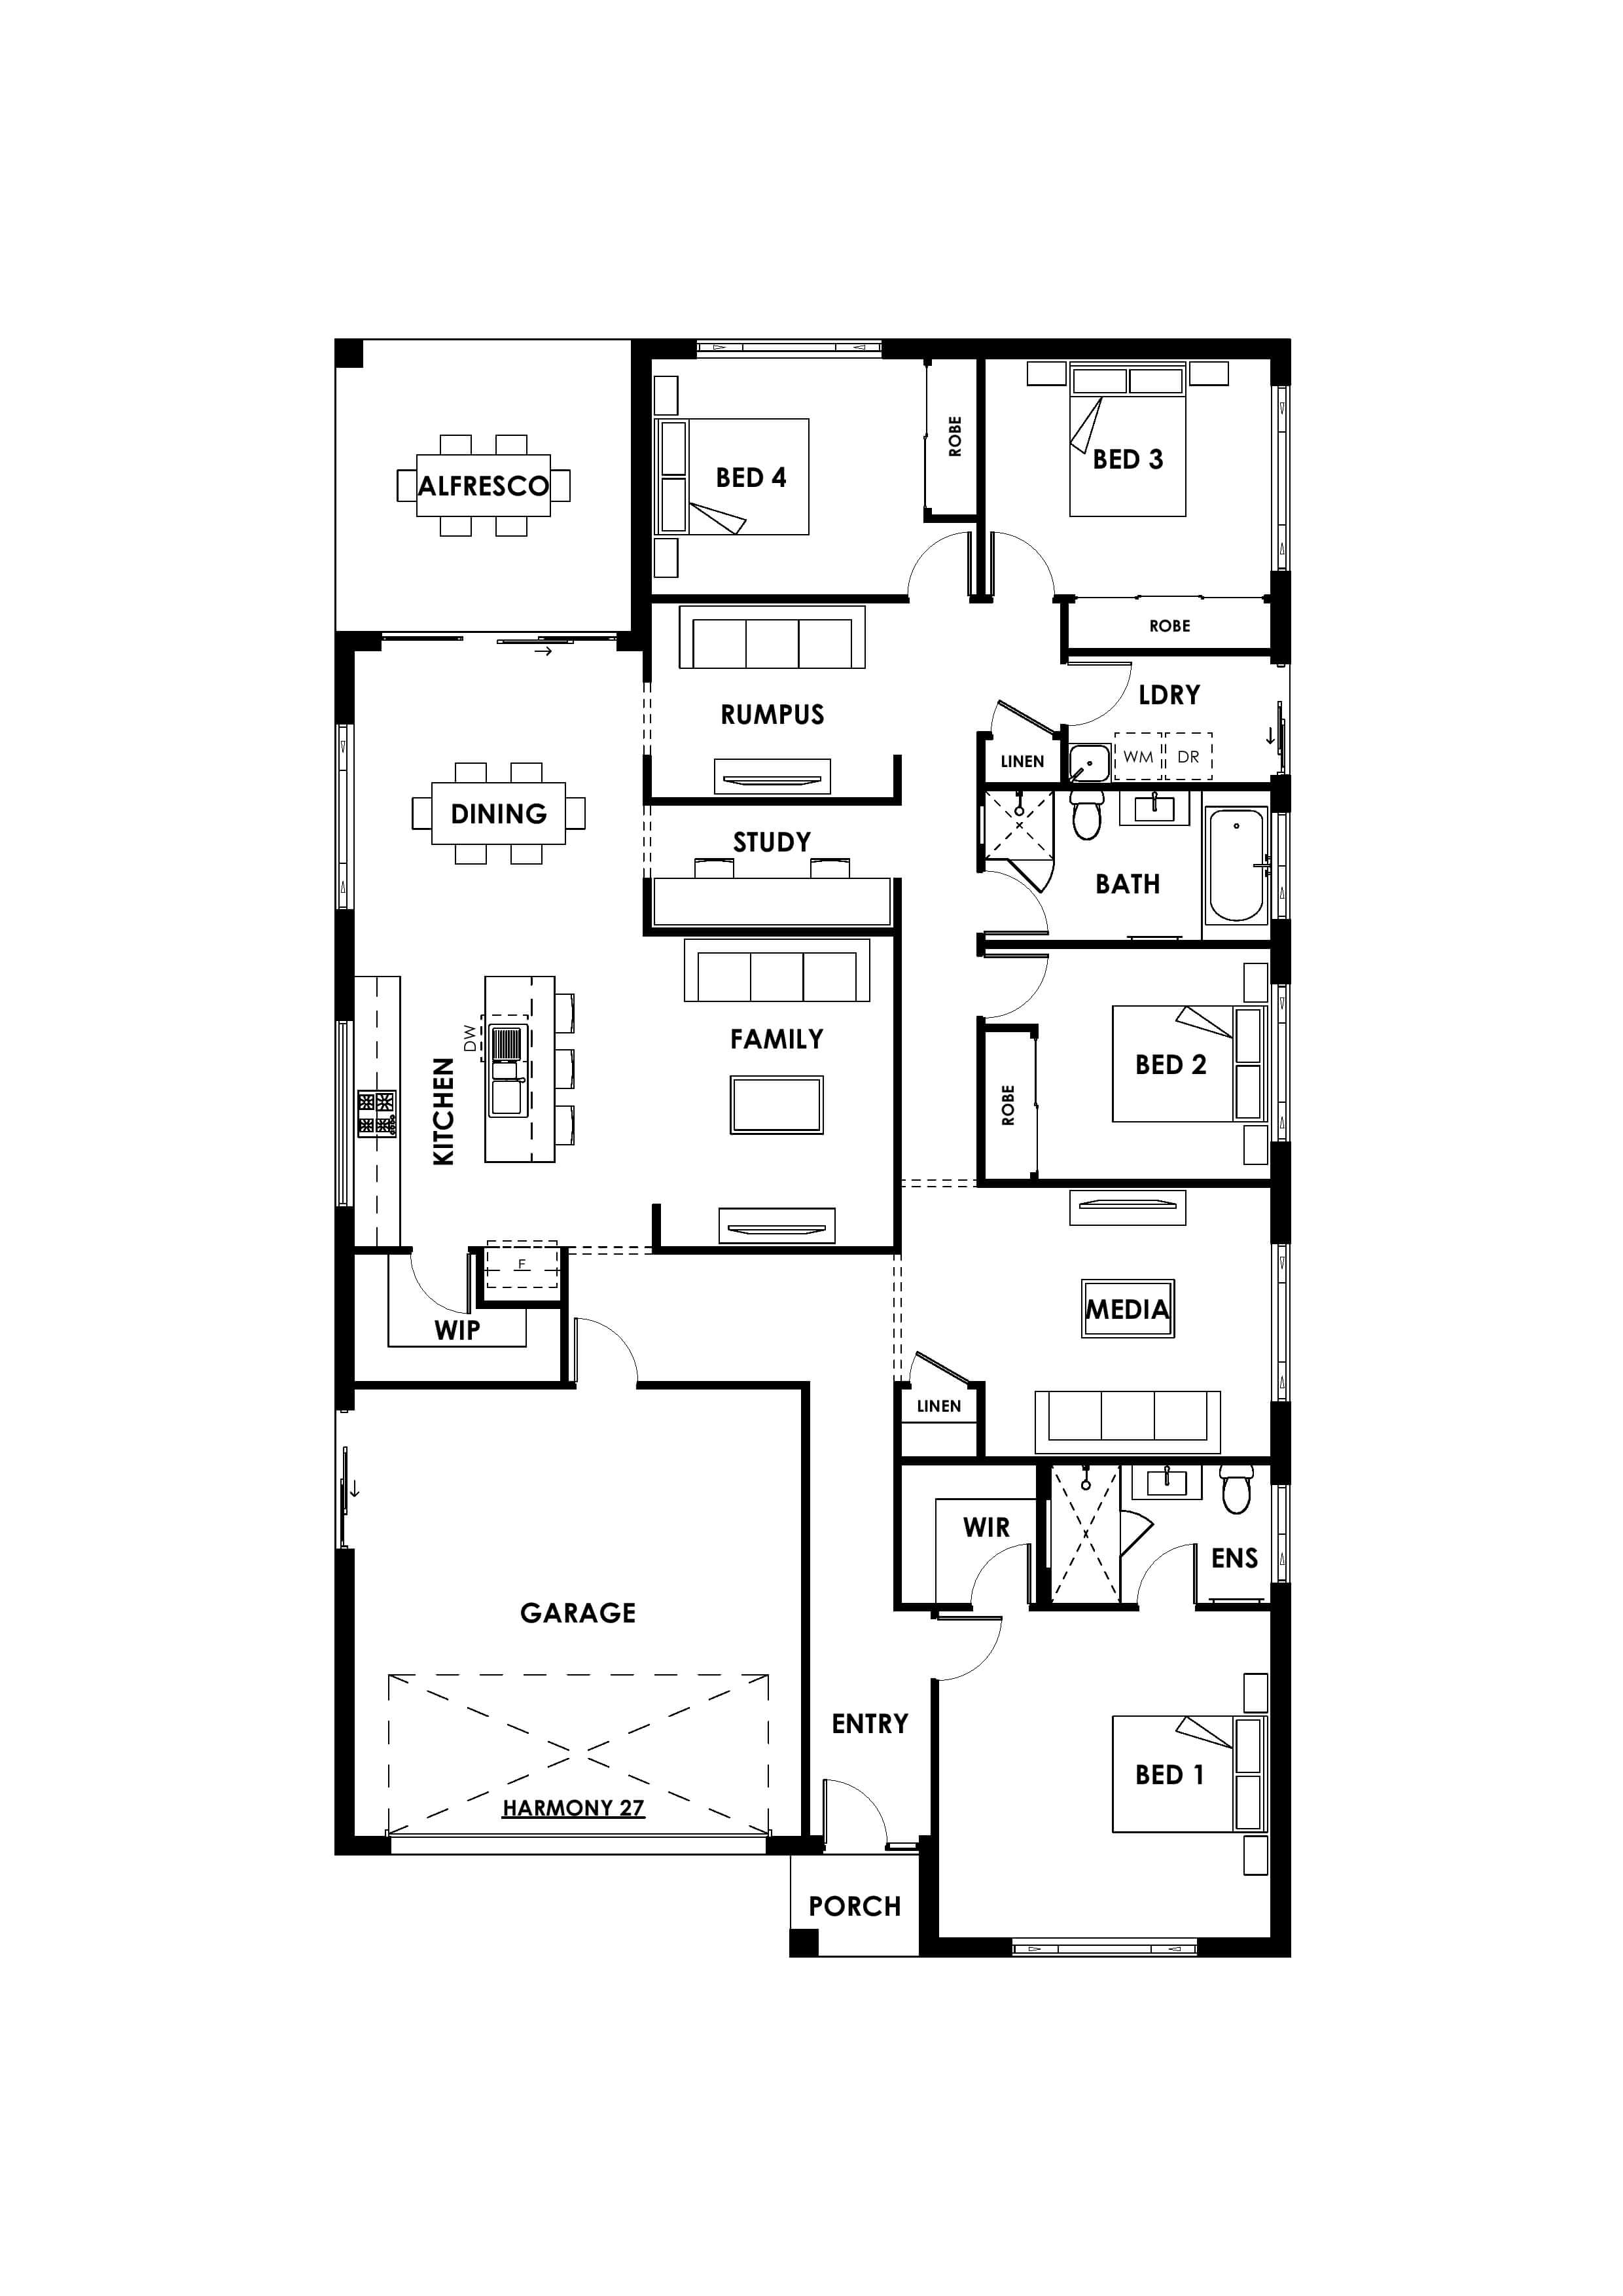 Home Designs | Search for New Home Designs & Floor Plans